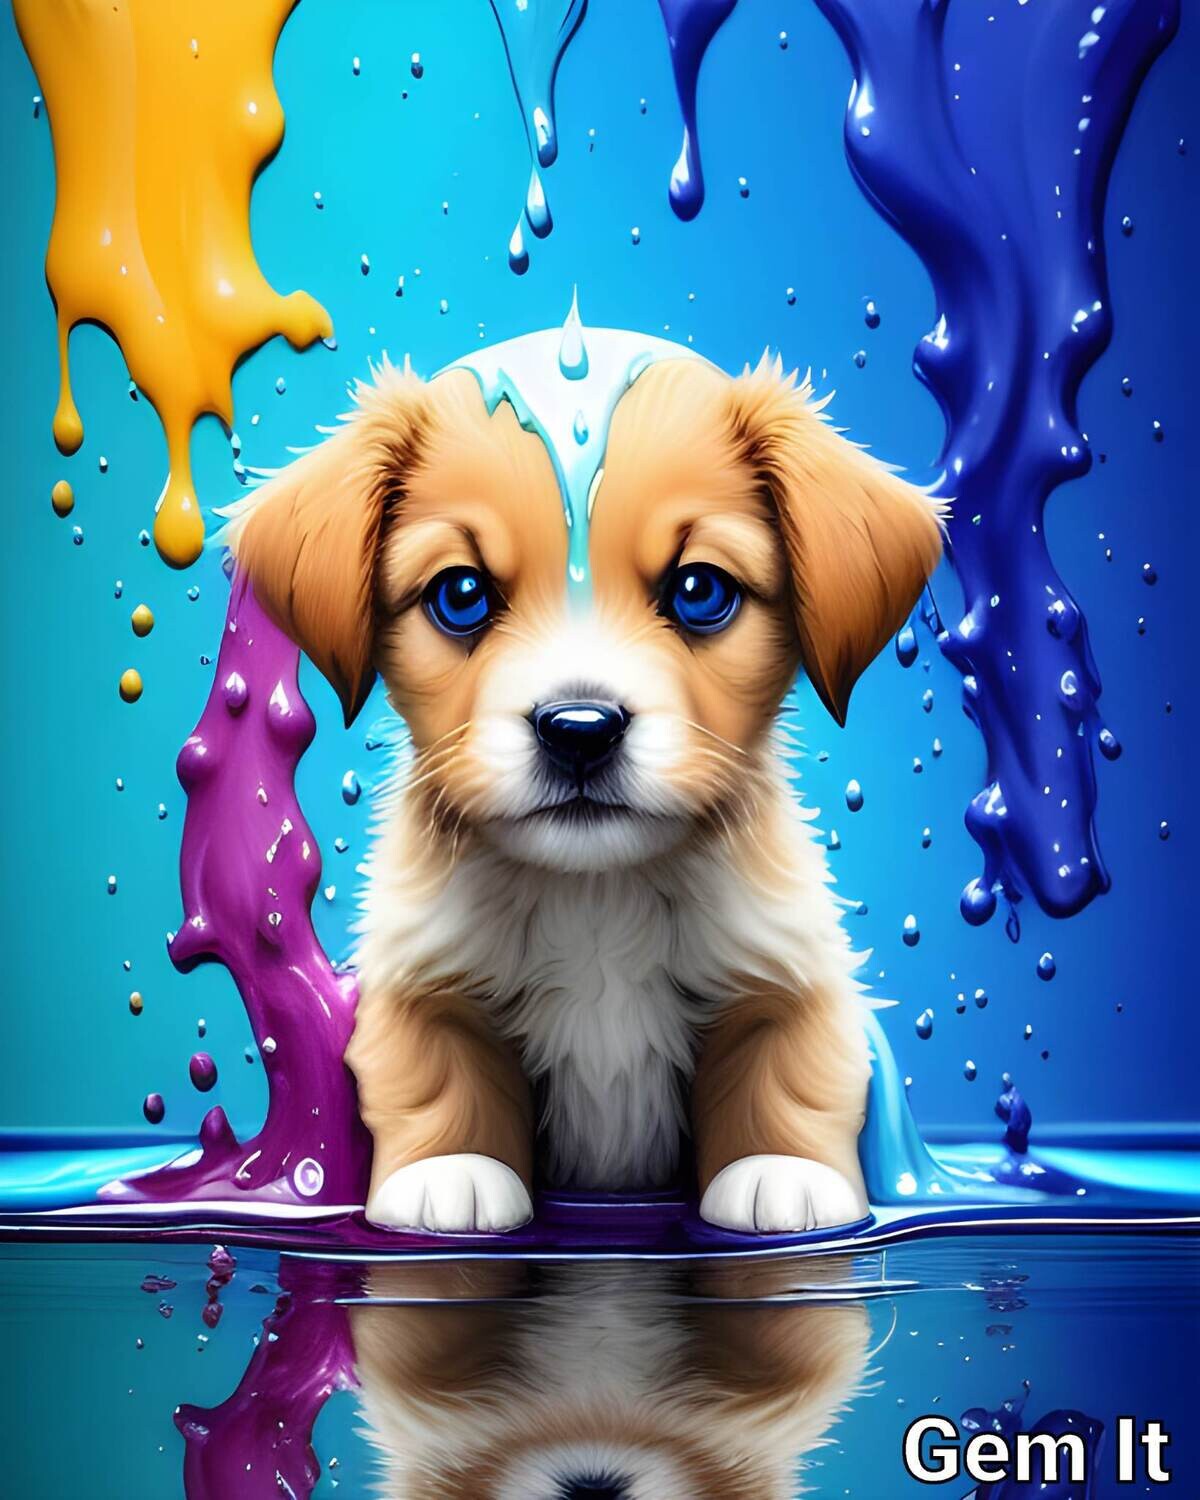 Splash Art Puppy 3 - Specially ordered for you. Delivery is approximately 4 - 6 weeks.